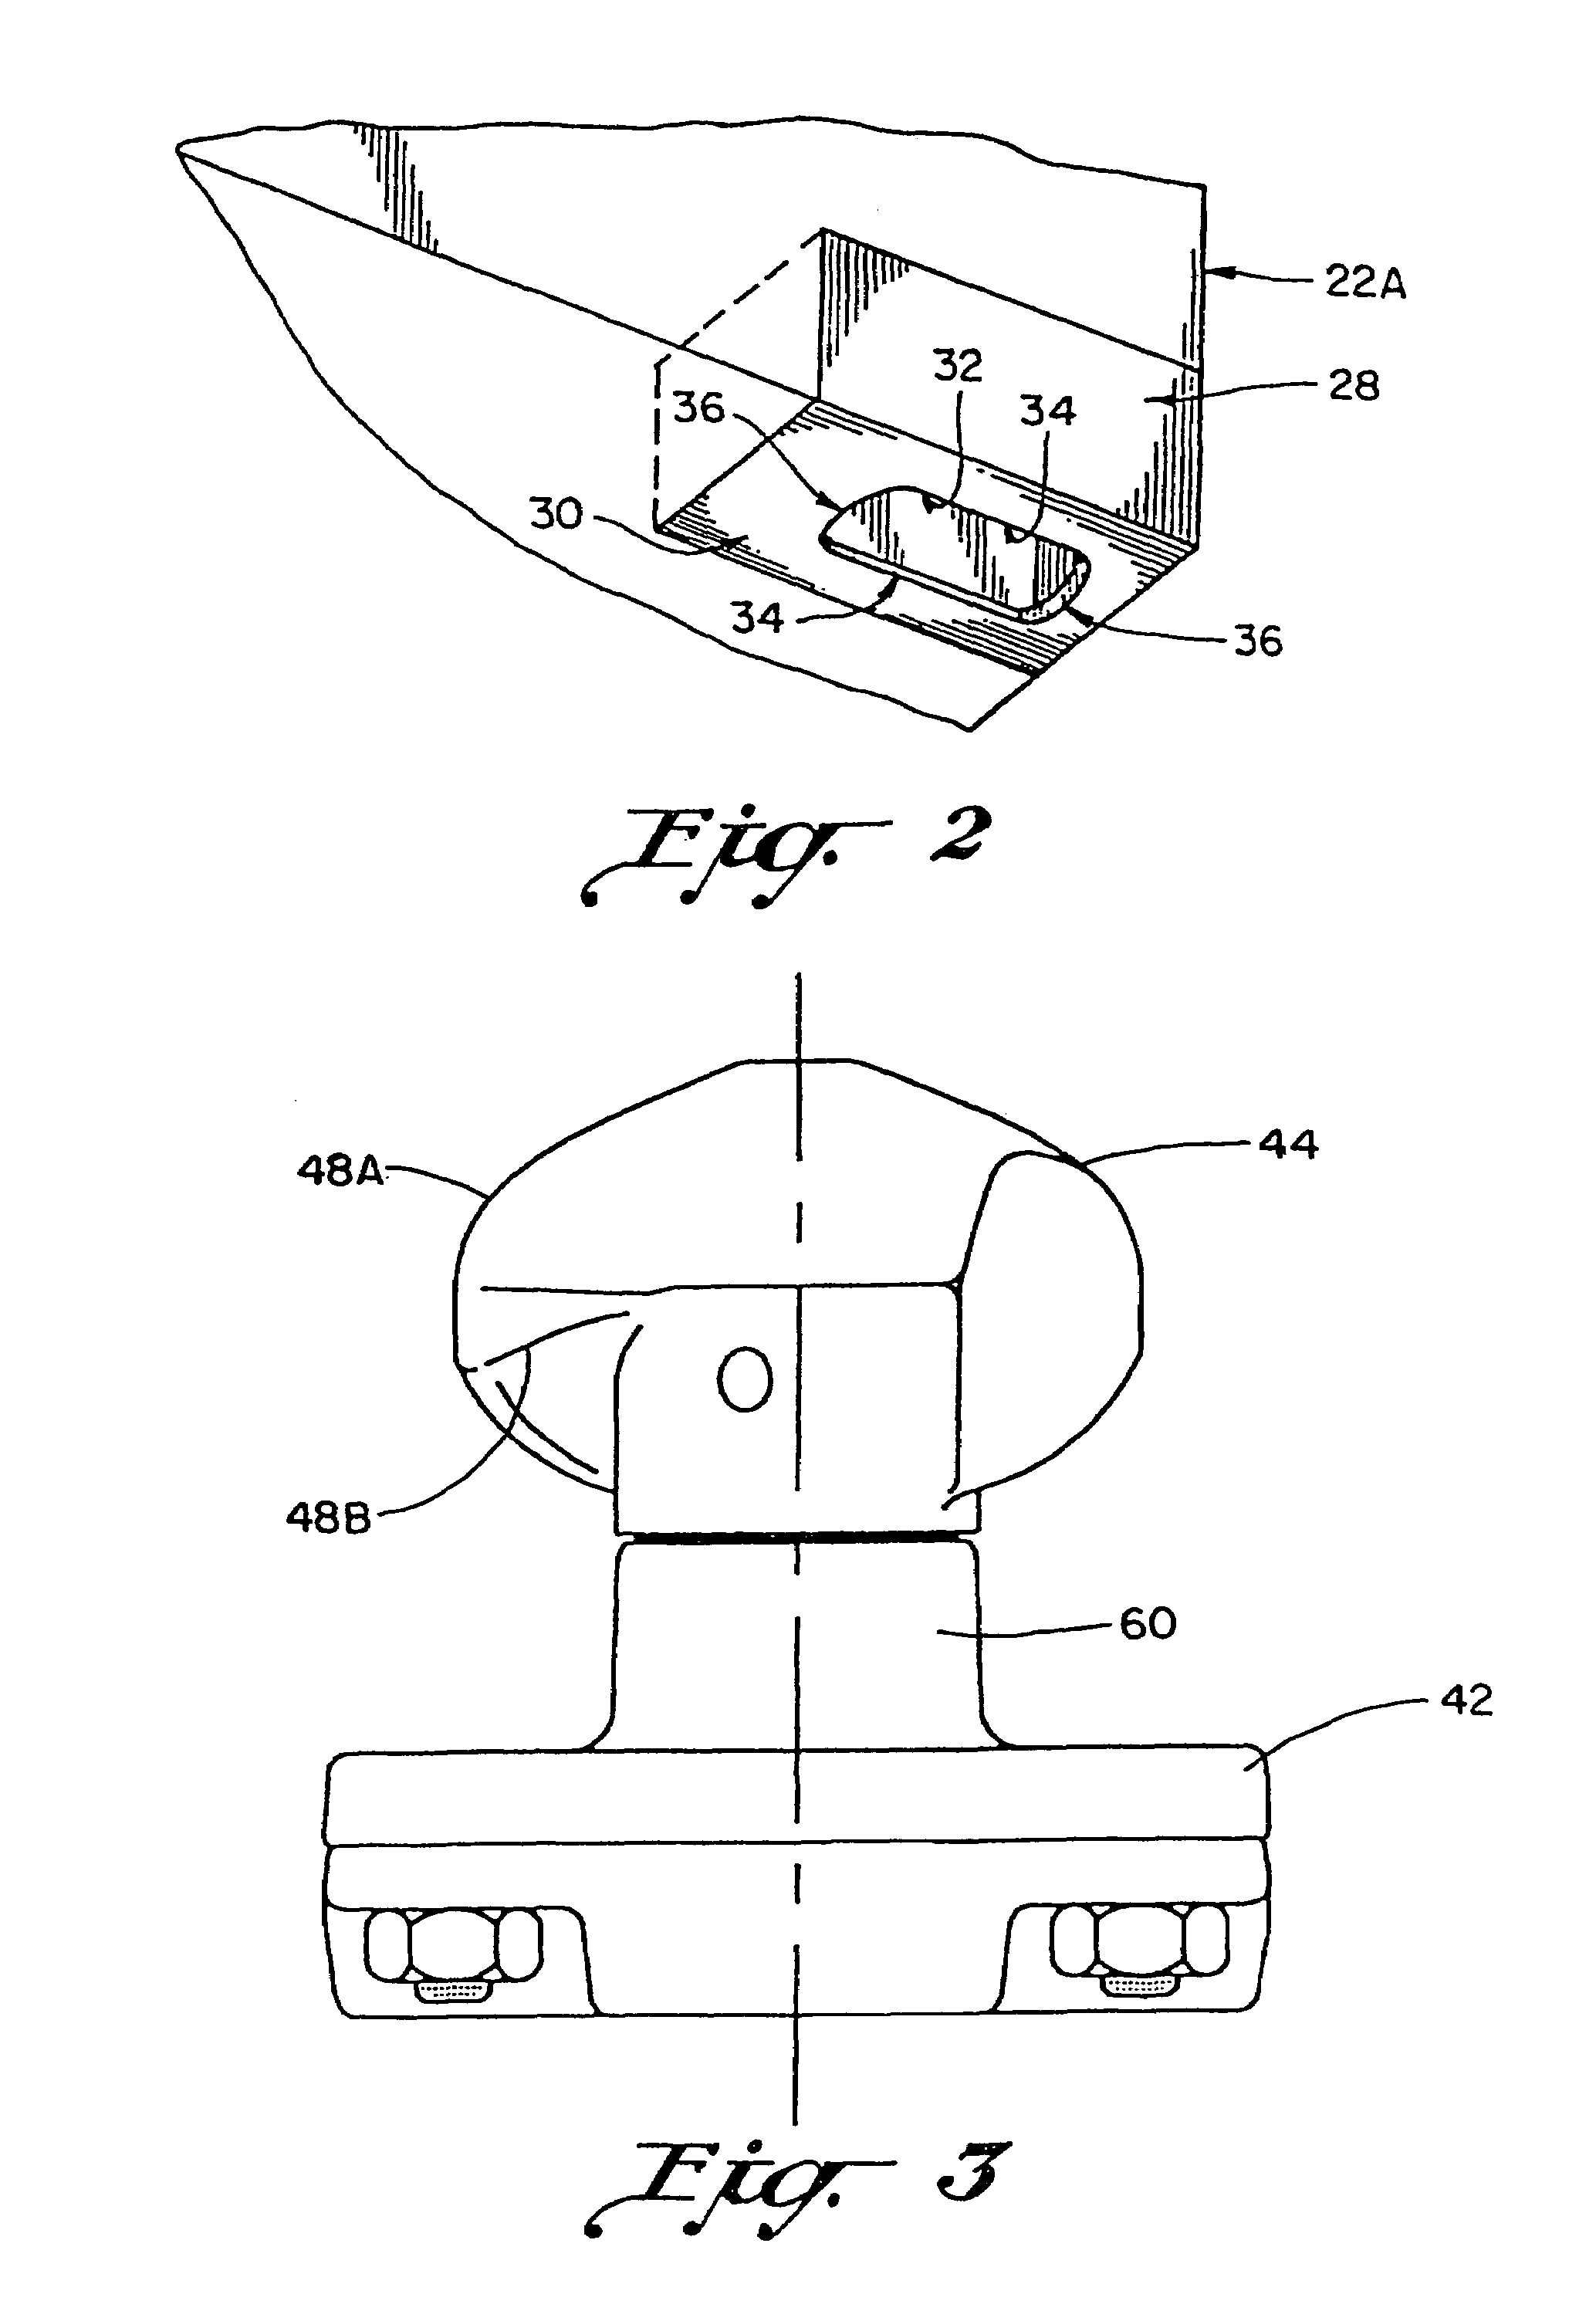 Container securement device and system